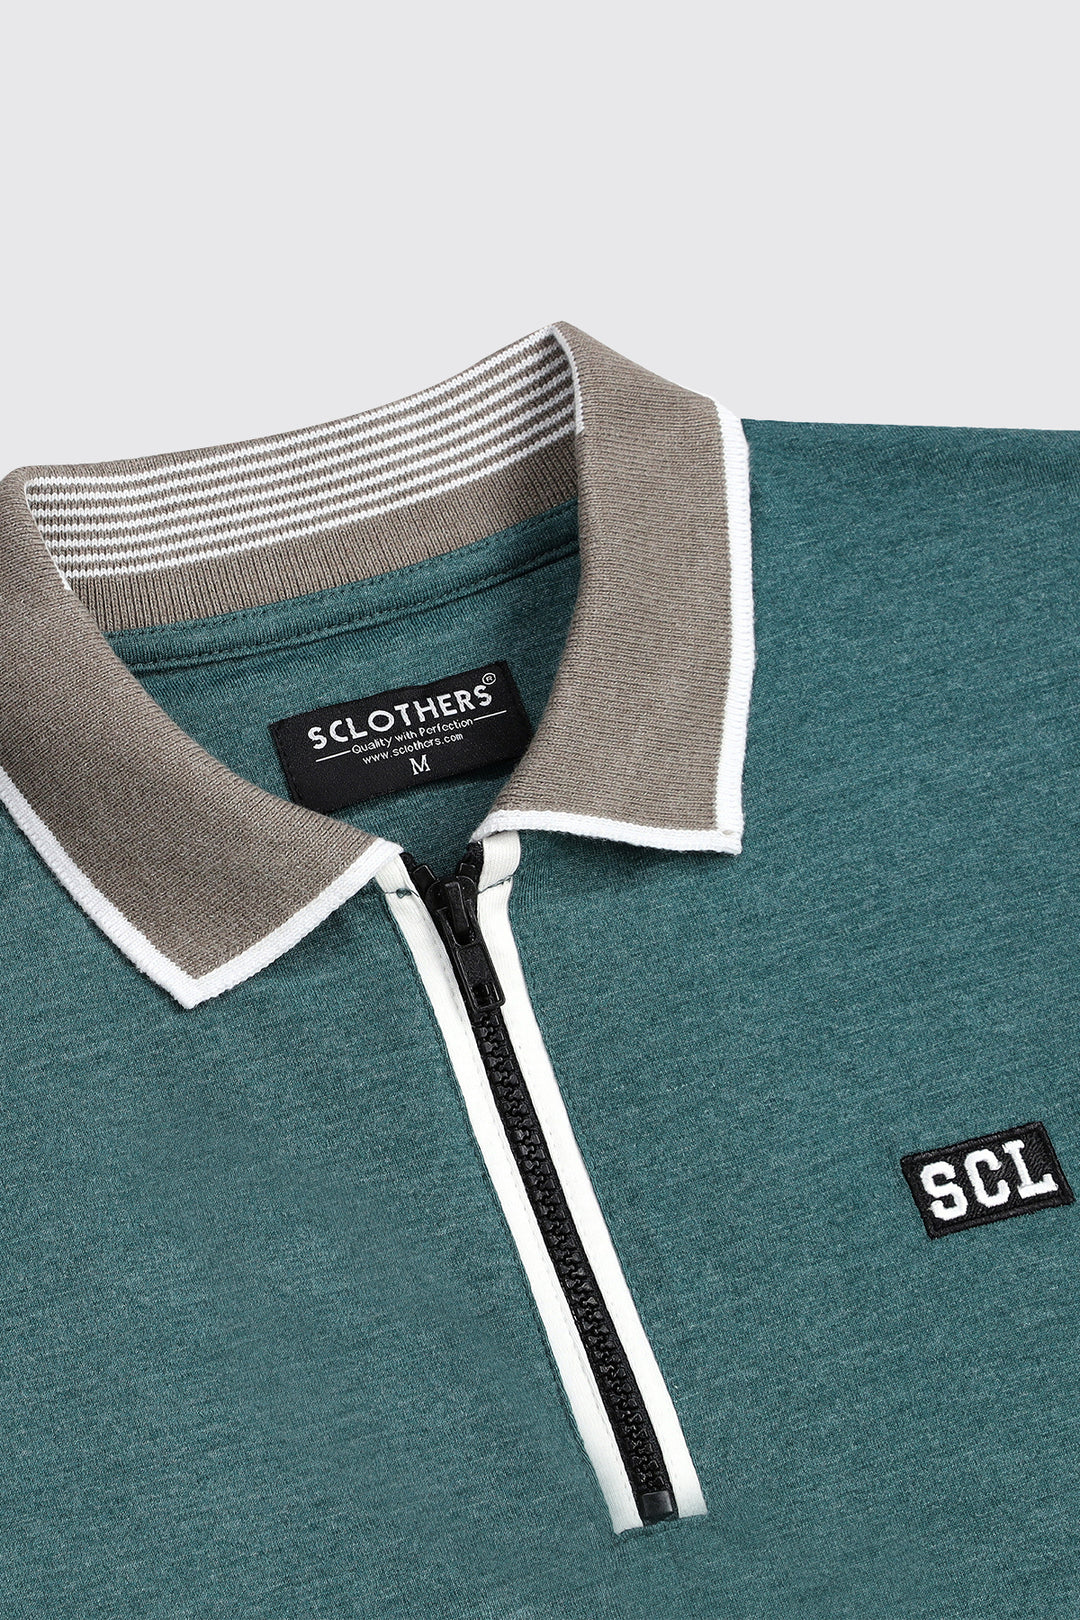 Teal Melange Contrast Zipper Embroidered Polo Shirt - A23 - MP0211R